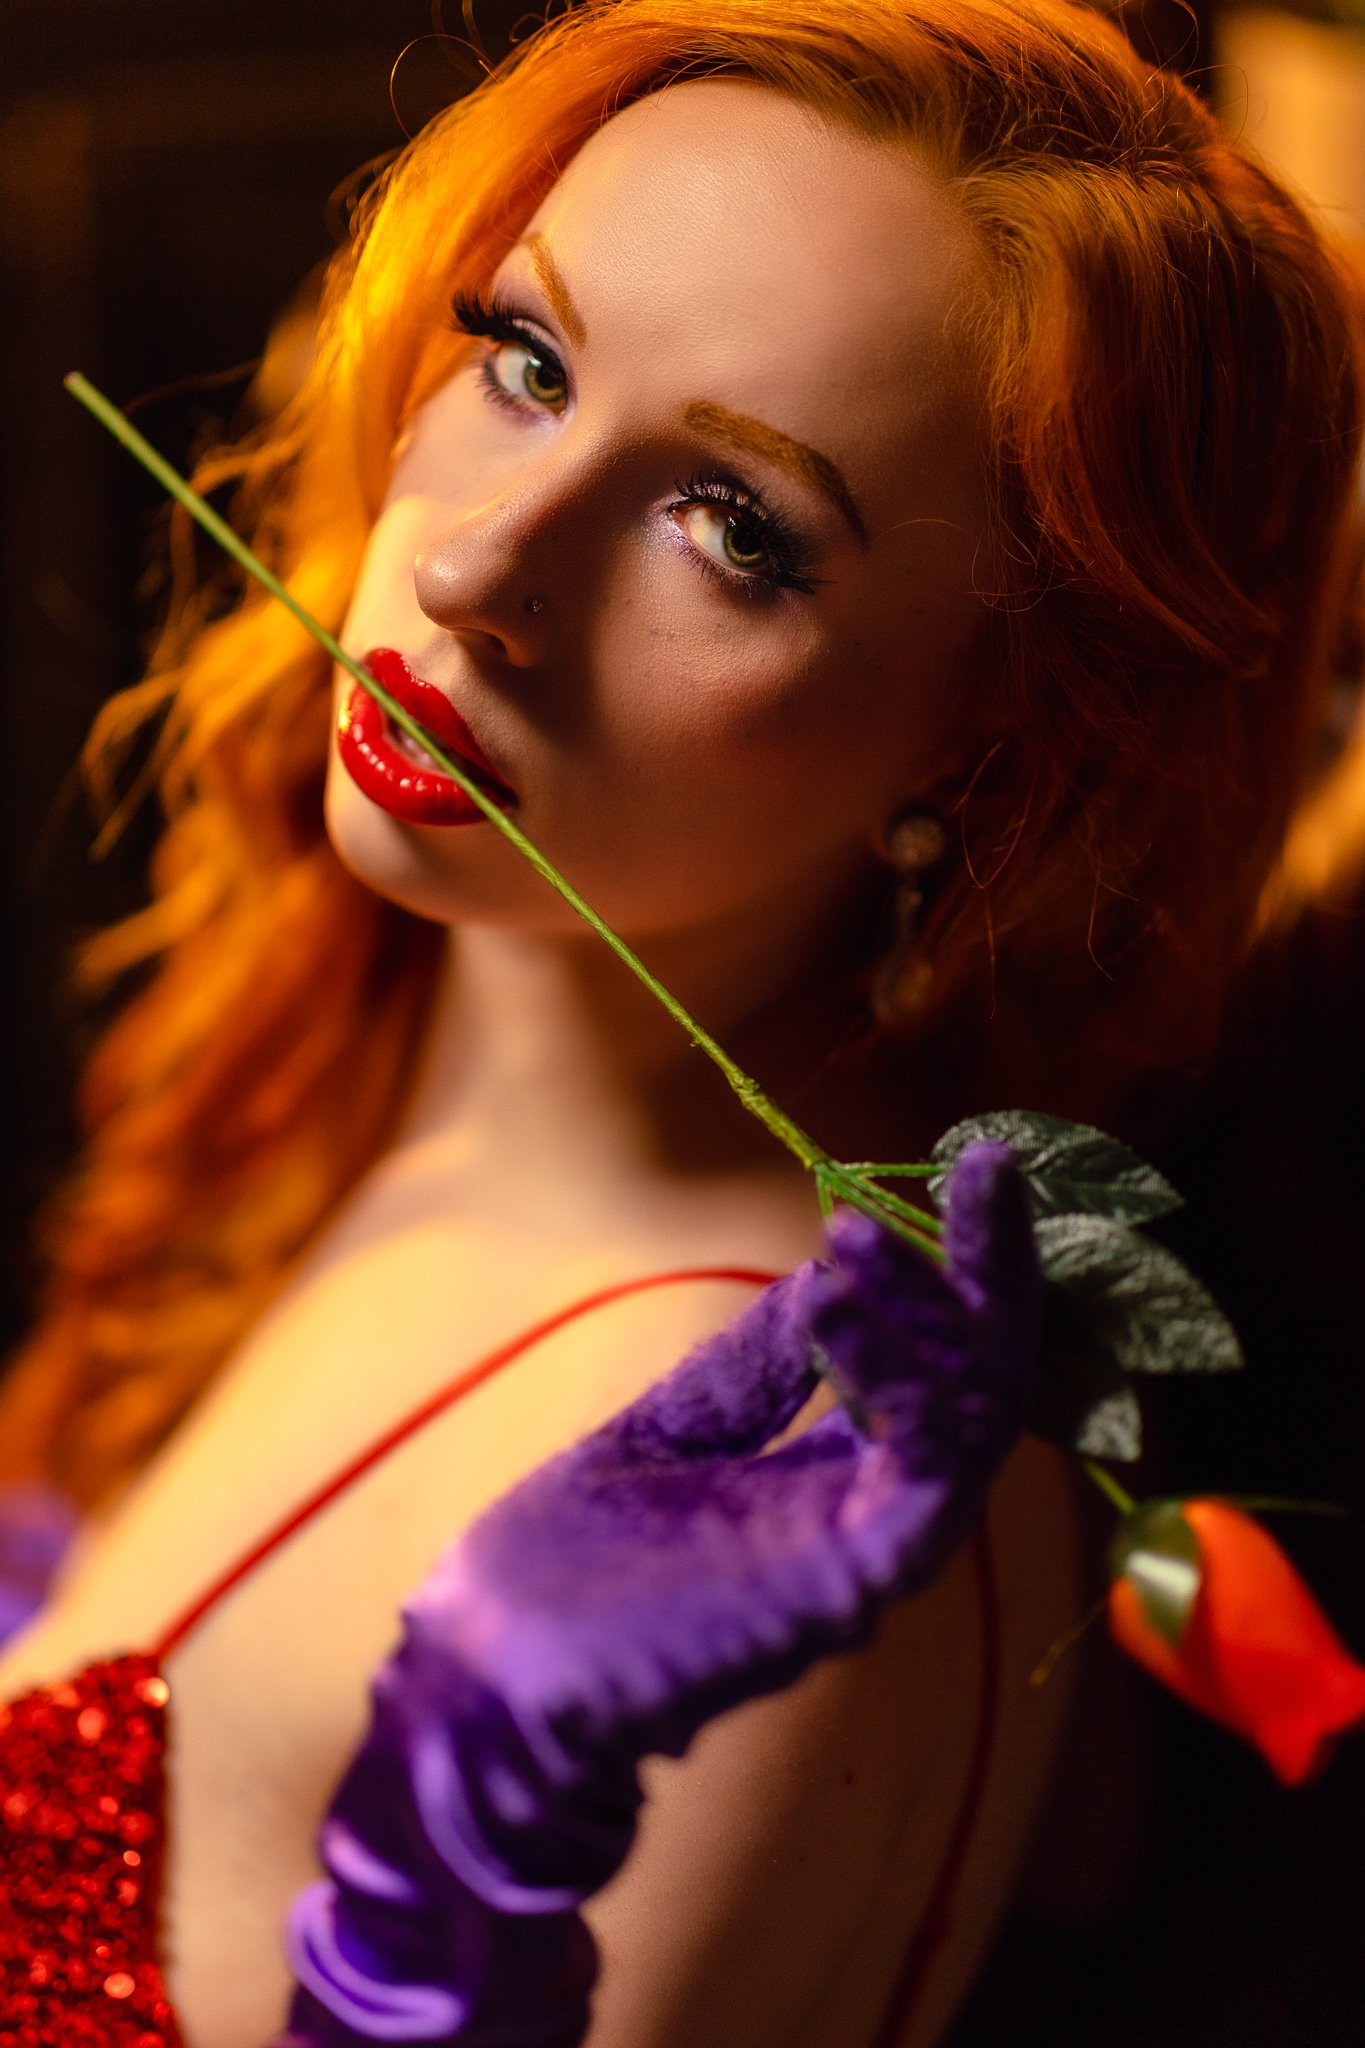 a glamour headshot photo of jessica rabbit with a rose in her mouth by photographer yohance bailey based in binghamton new york  serving ithaca syracuse upstate new york.jpg